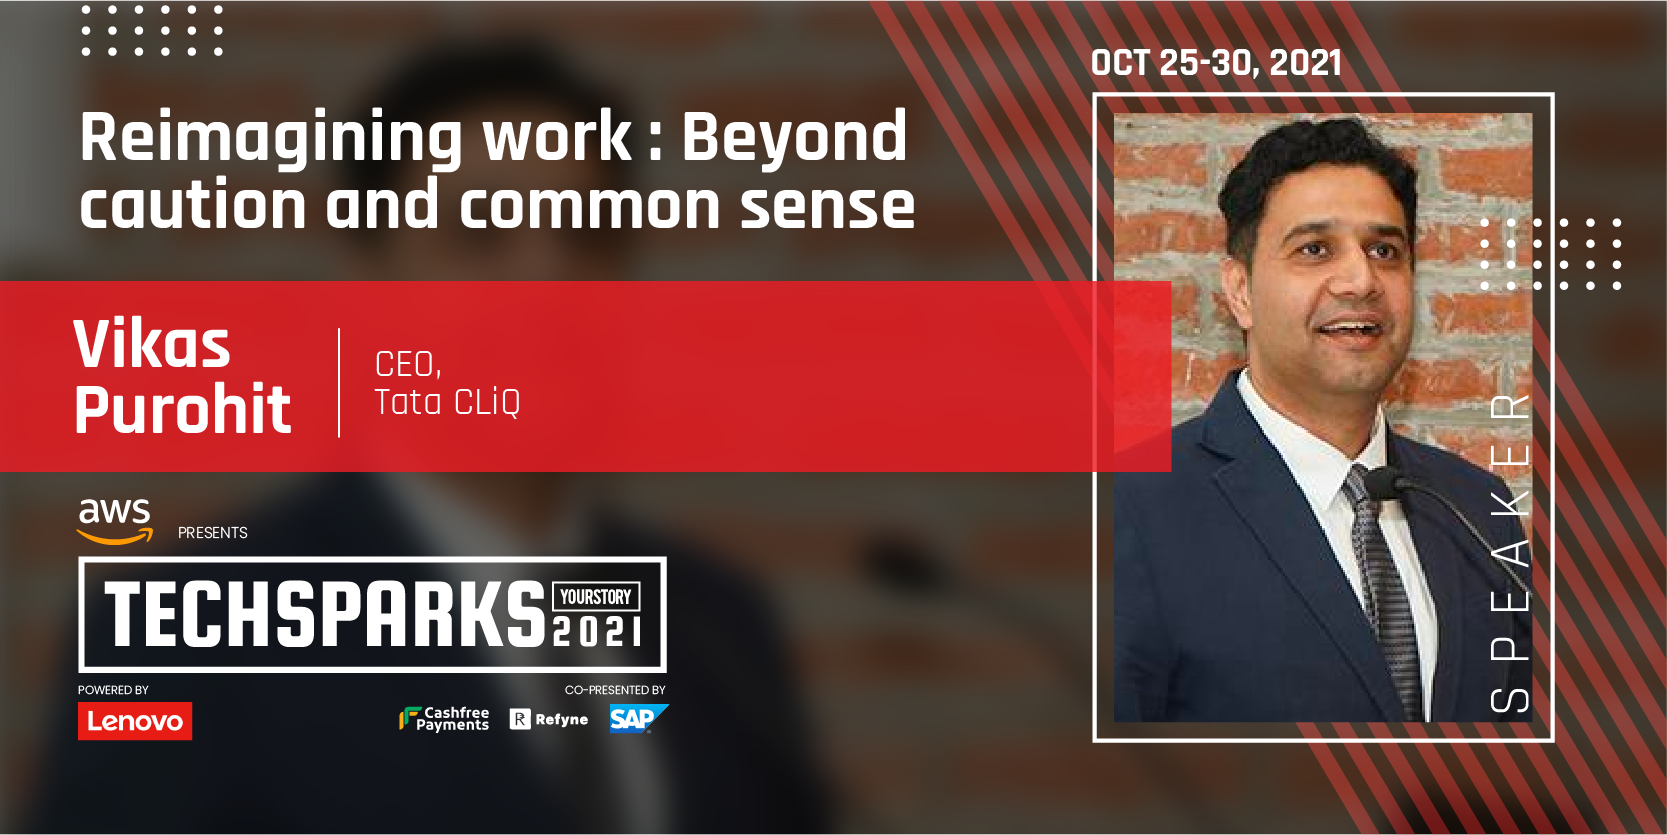 TATA CLiQ CEO Vikas Purohit on cracking the code for a perfect job switch at TechSparks 2021
